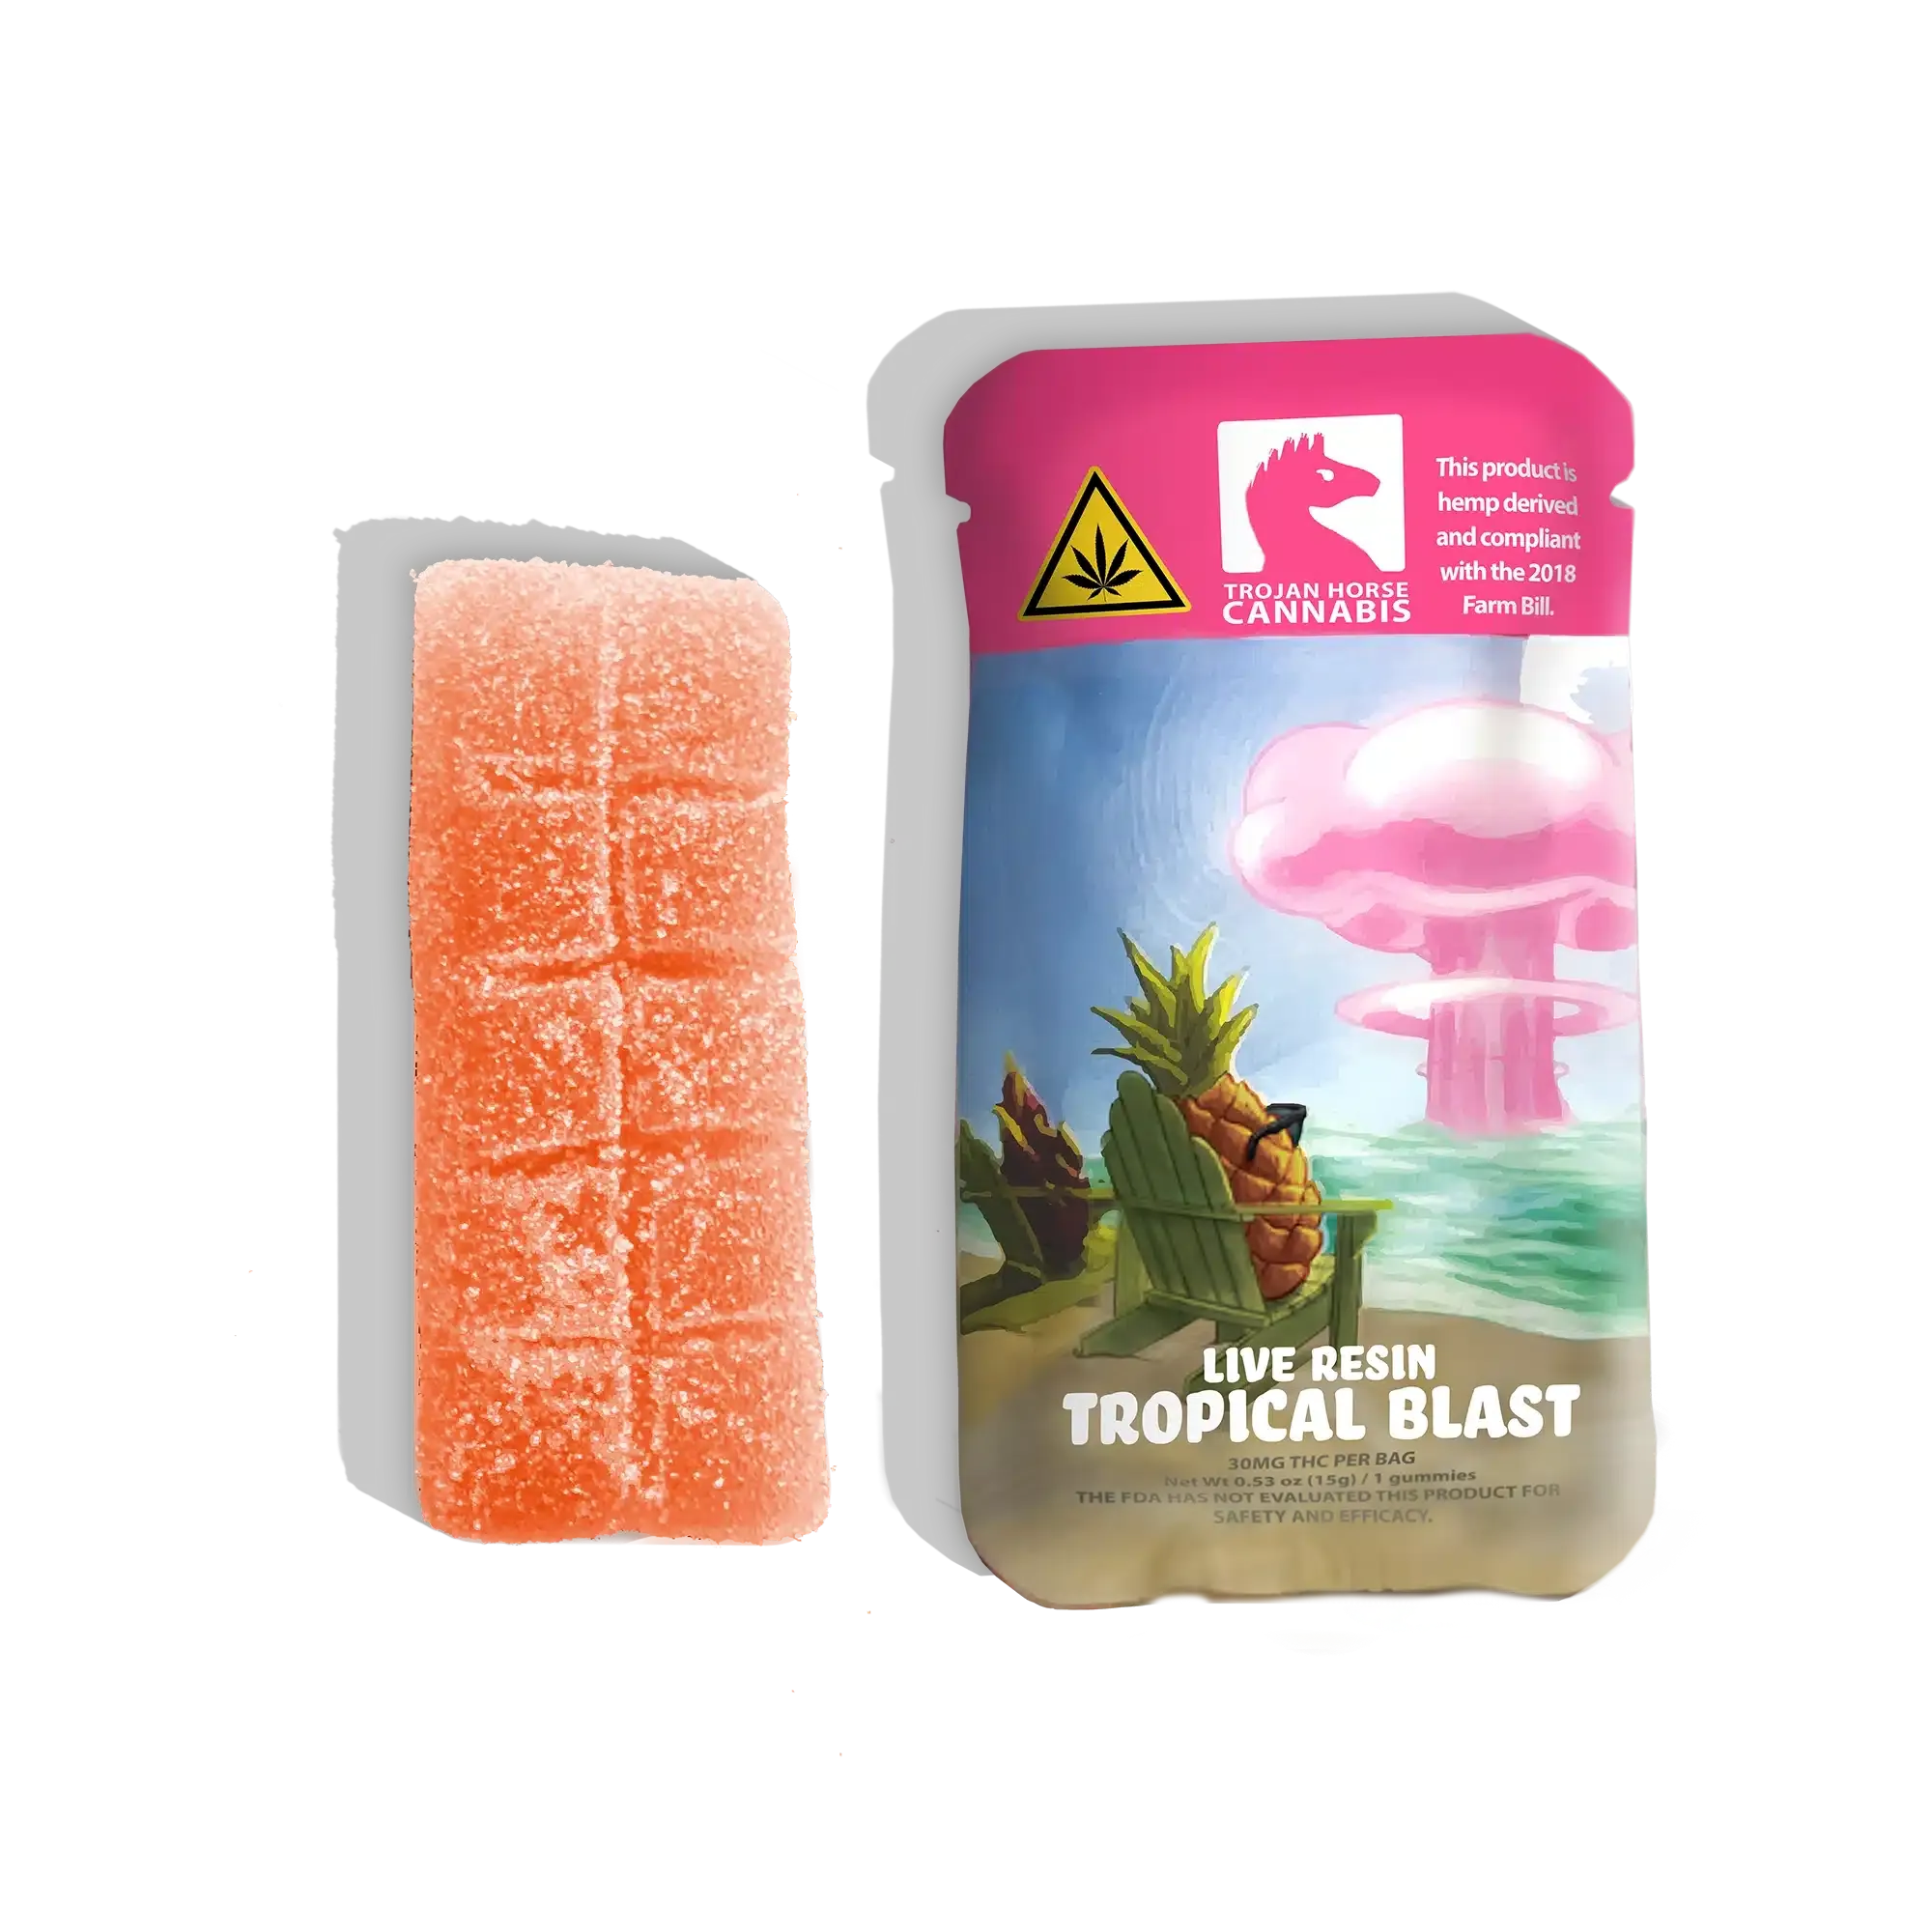 The clearet look at the outside and the inside of trojan horse cannabis live resin thc gummy single packs. With eye catching colors on the product label and unusually but extremely helpful dose scored engraved into the gummy, users, readers, and viewers can only get excited when viewing this photo.